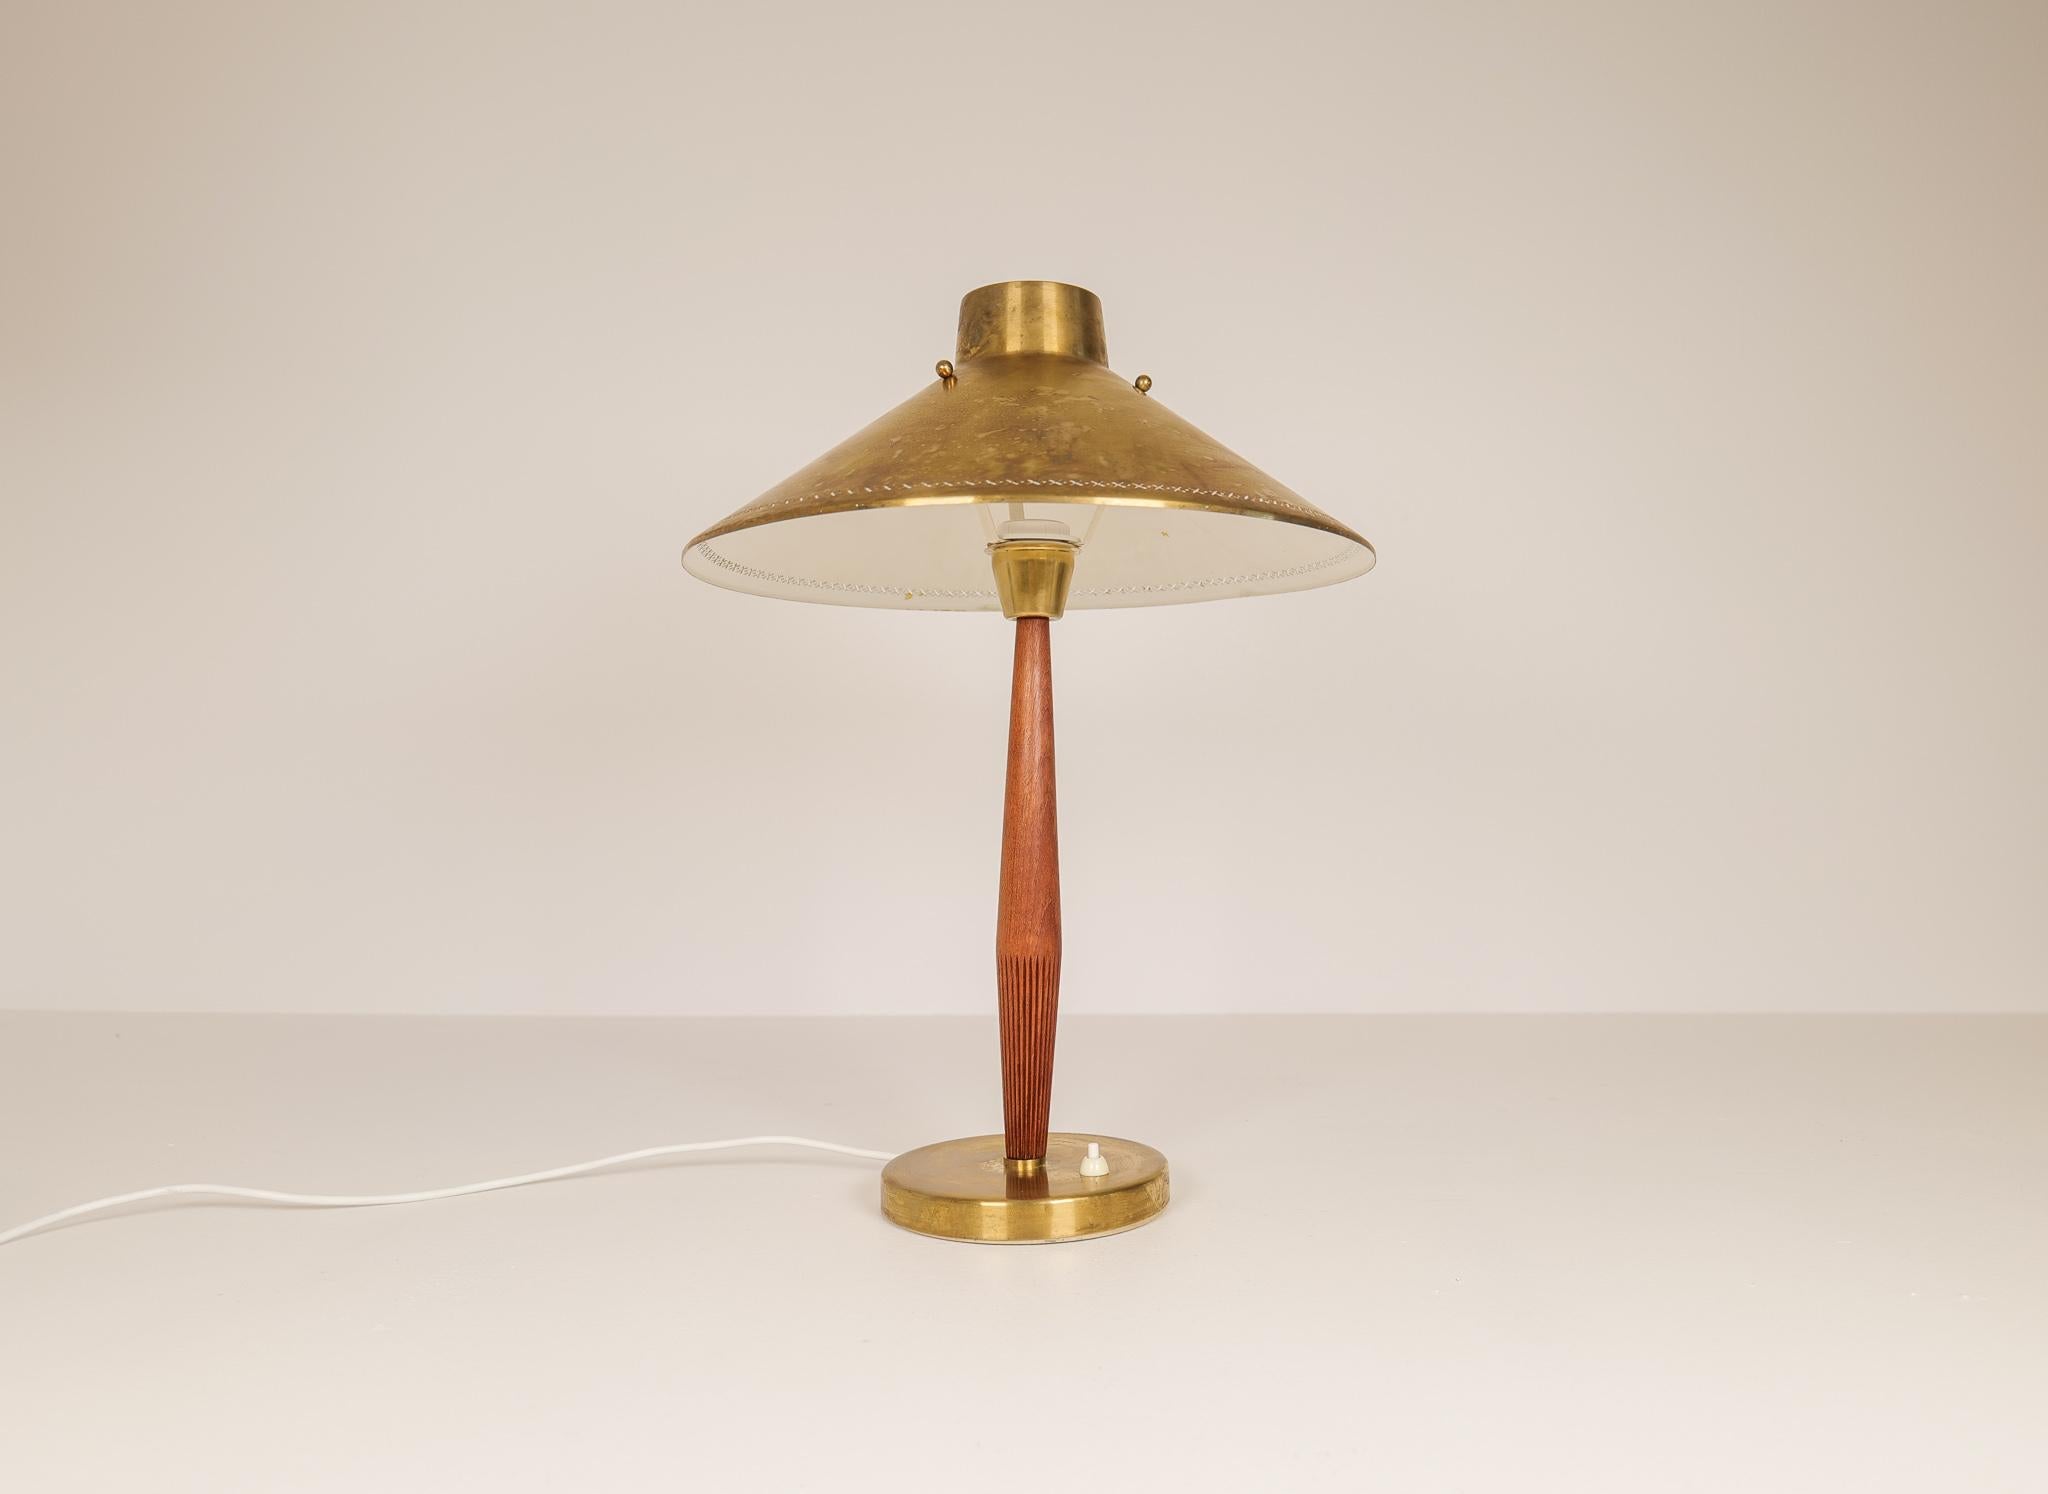 Elegant Swedish table lamp made in 1940 for ASEA and designed by Hans Bergström. A metal and brass base with teak leading up to a patinated brass shade in a nice combination. 

Good condition with some wear consistent with age and